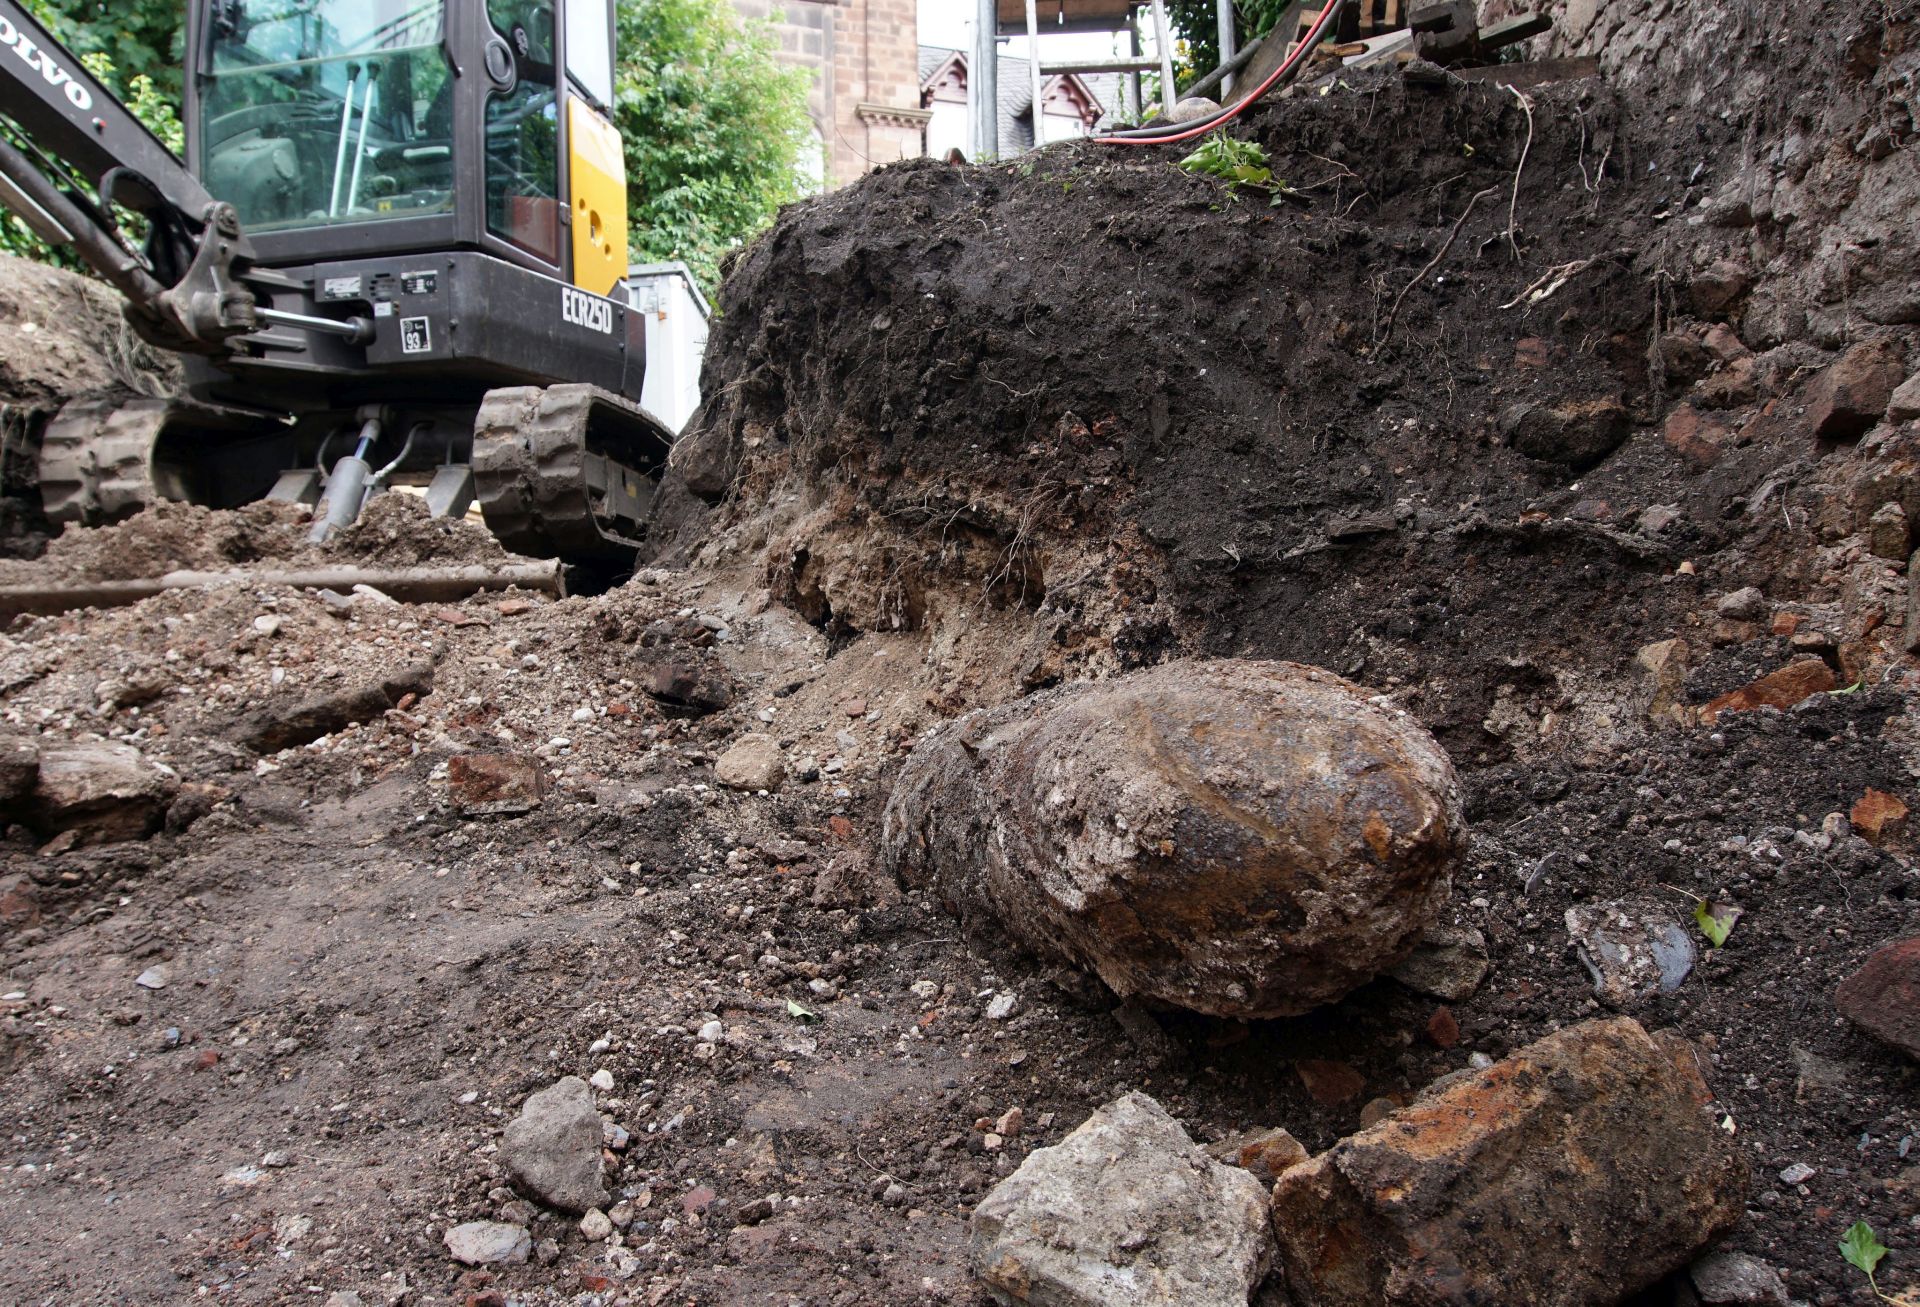 epa05399400 A British WWII aerial bomb (C-R) lies in the earth of a construction site in the centre of Trier, Germany, 30 June 2016. The 250 kilogram bomb was found during construction works and will be defused in the evening of 01 July 2016. An evacuation zone will be vacated within a radius of of 500 metres from the bomb. Around 6,000 residents are affected by the security measures.  EPA/HARALD TITTEL